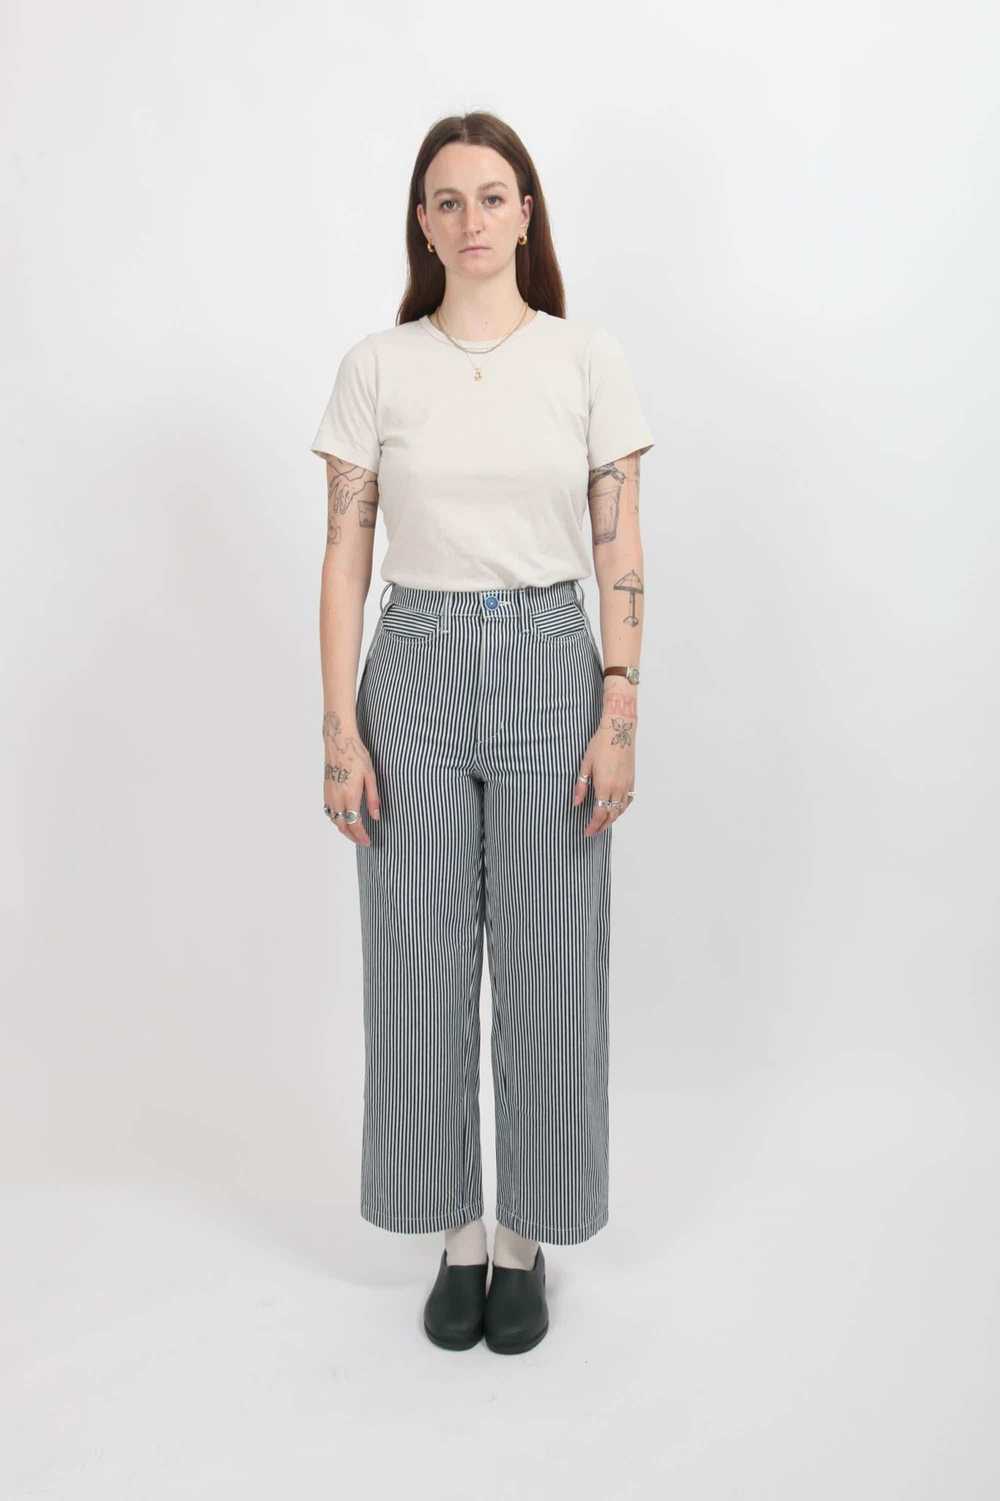 Gravel & Gold Placer Pants - Conductor Stripe - image 1